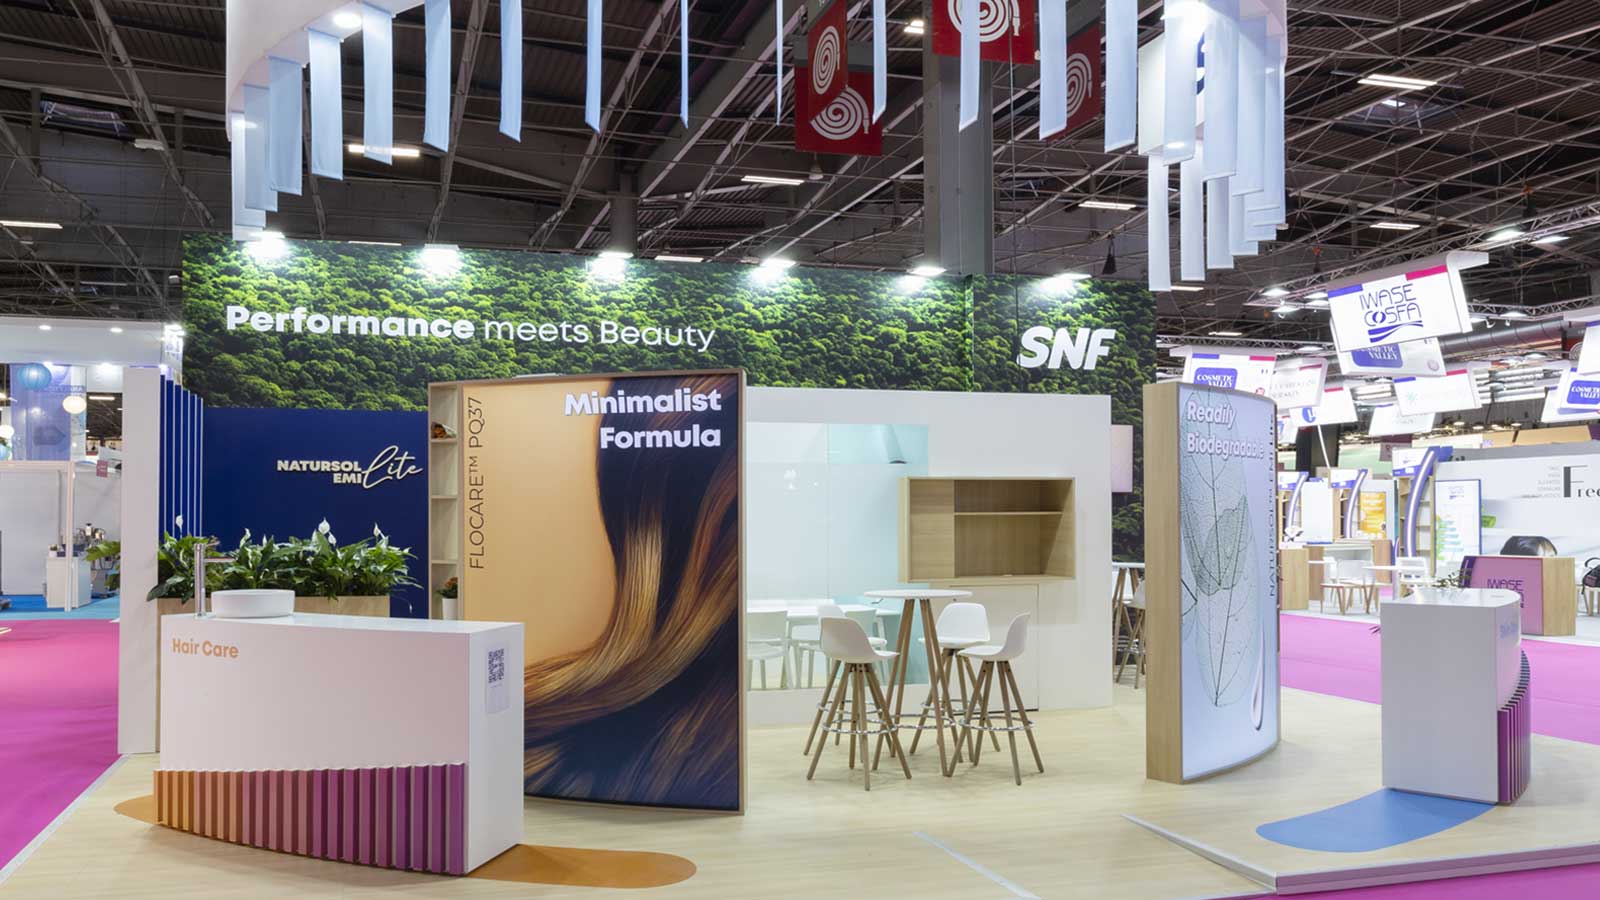 Stand-Design-SNF-InCosmetics-Meeting